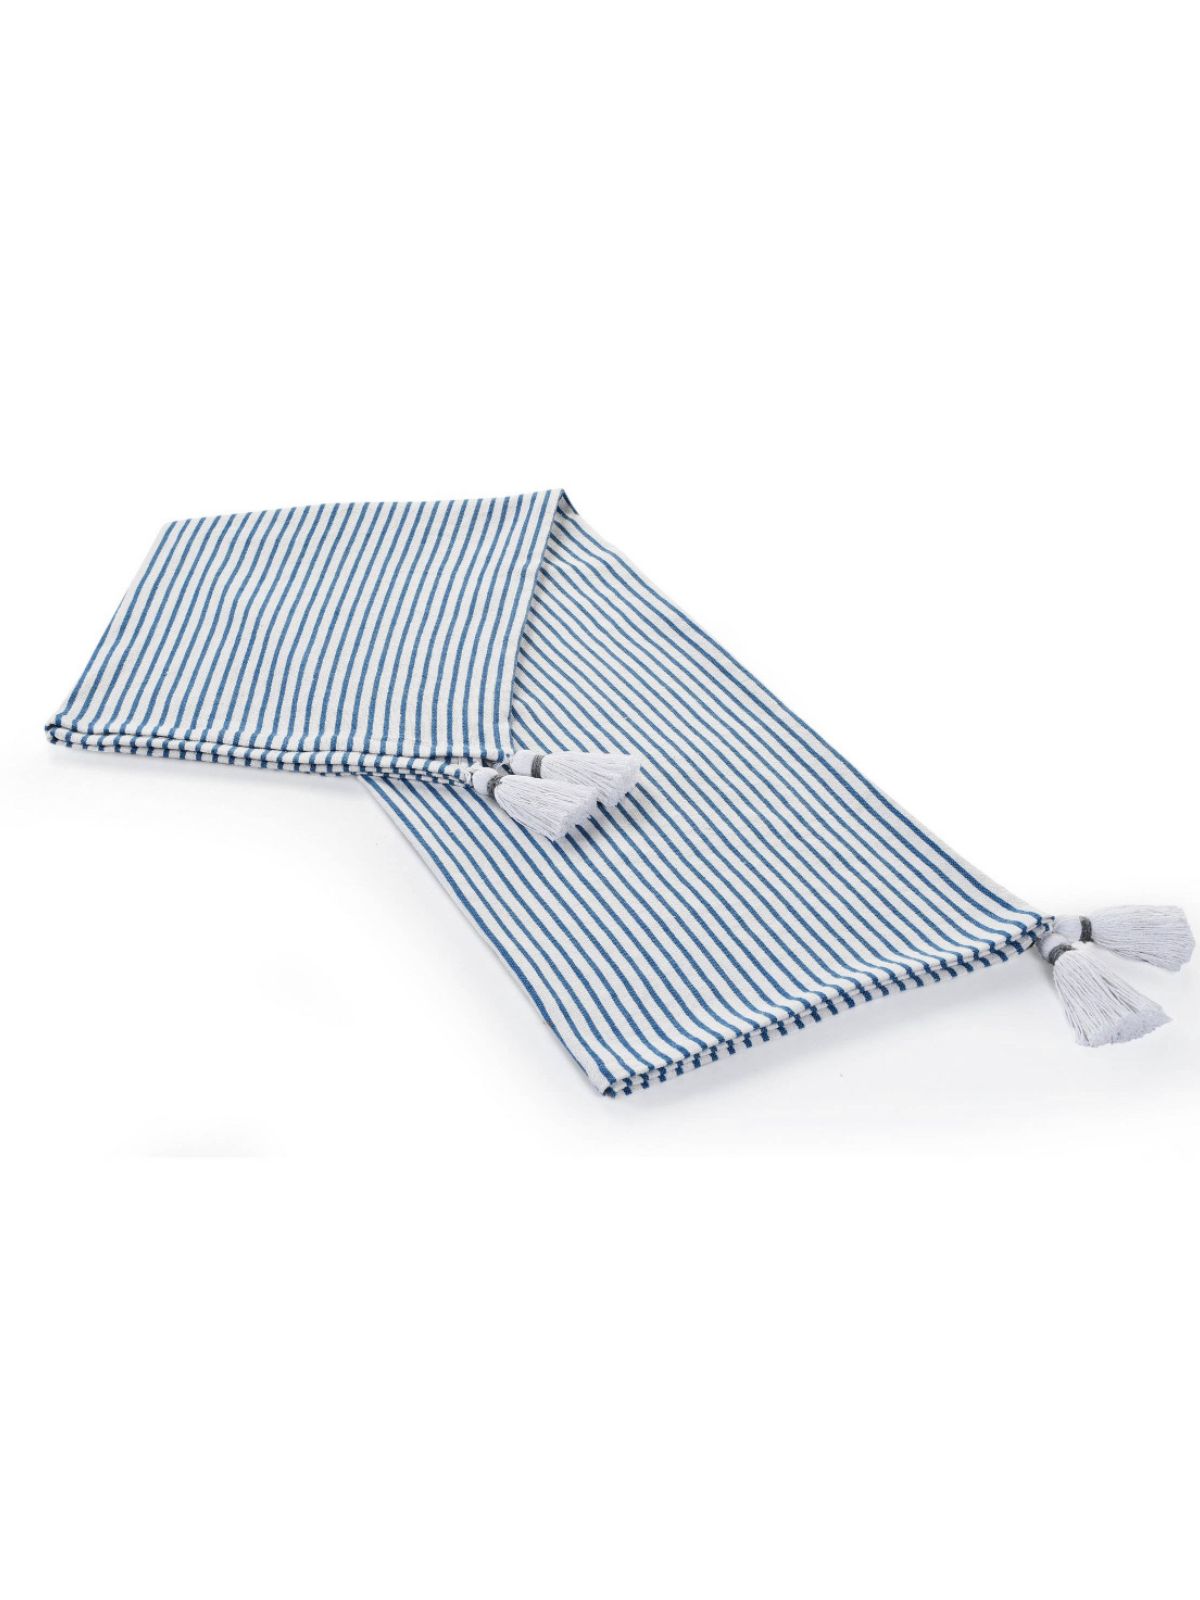 Blue and Ivory Striped 100% Cotton Decorative Throw Blanket with Tassels Sold by KYA Home Decor, 50W x 60L. 